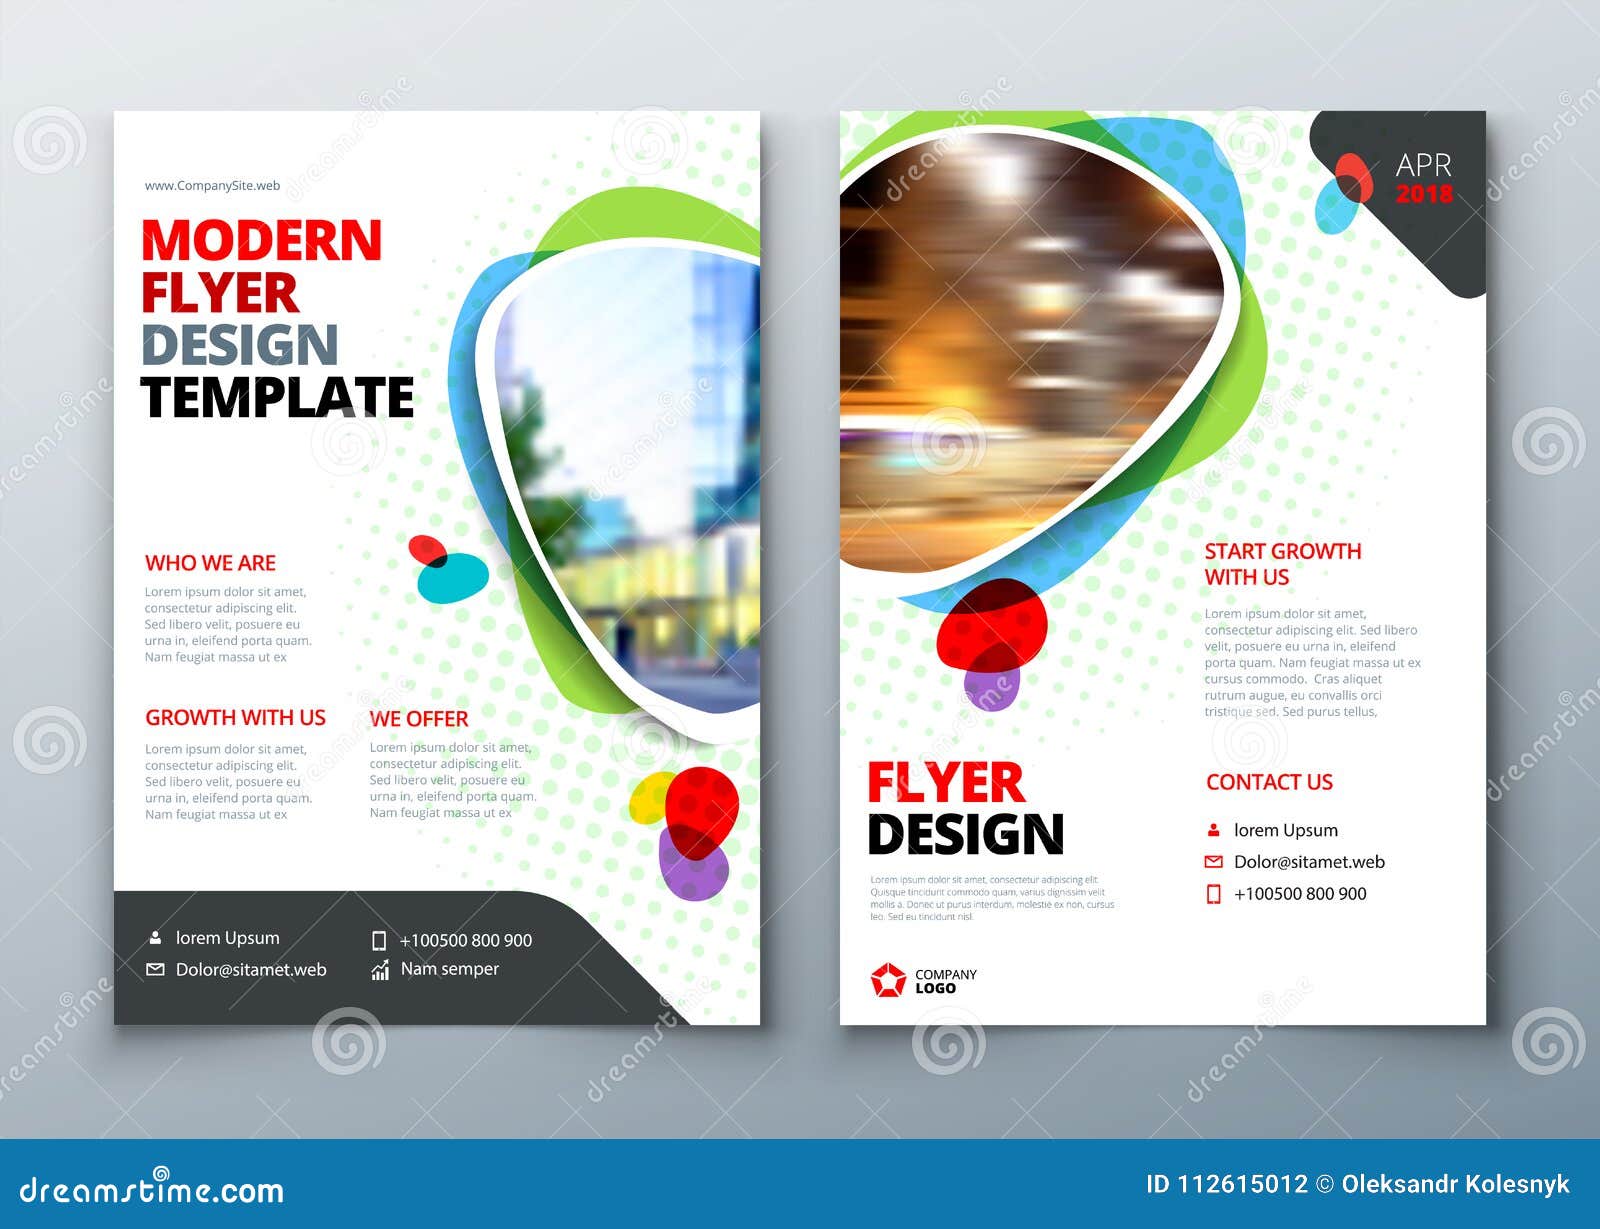 flyer template layout . business flyer, brochure, magazine or flier mockup in bright colors. 